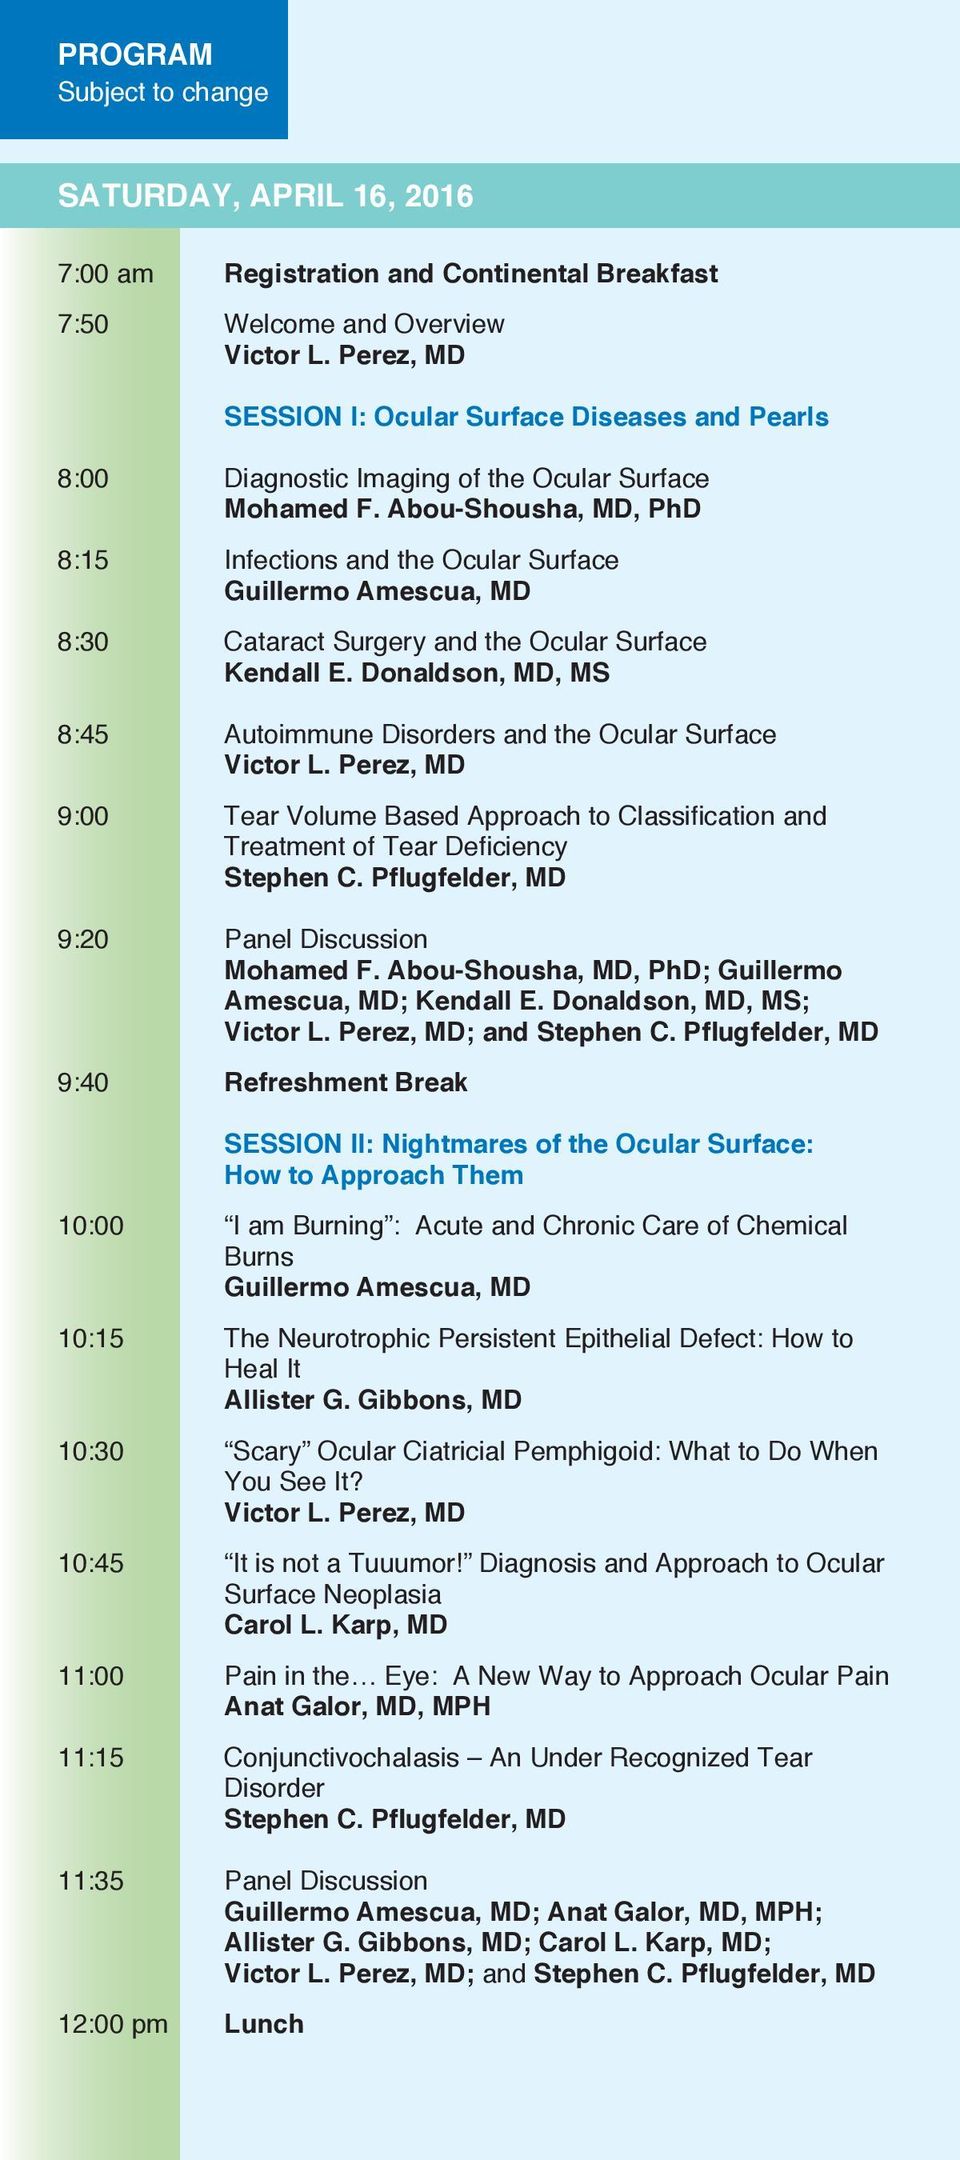 Donaldson, MD, MS 8:45 Autoimmune Disorders and the Ocular Surface 9:00 Tear Volume Based Approach to Classification and Treatment of Tear Deficiency 9:20 Panel Discussion Mohamed F.